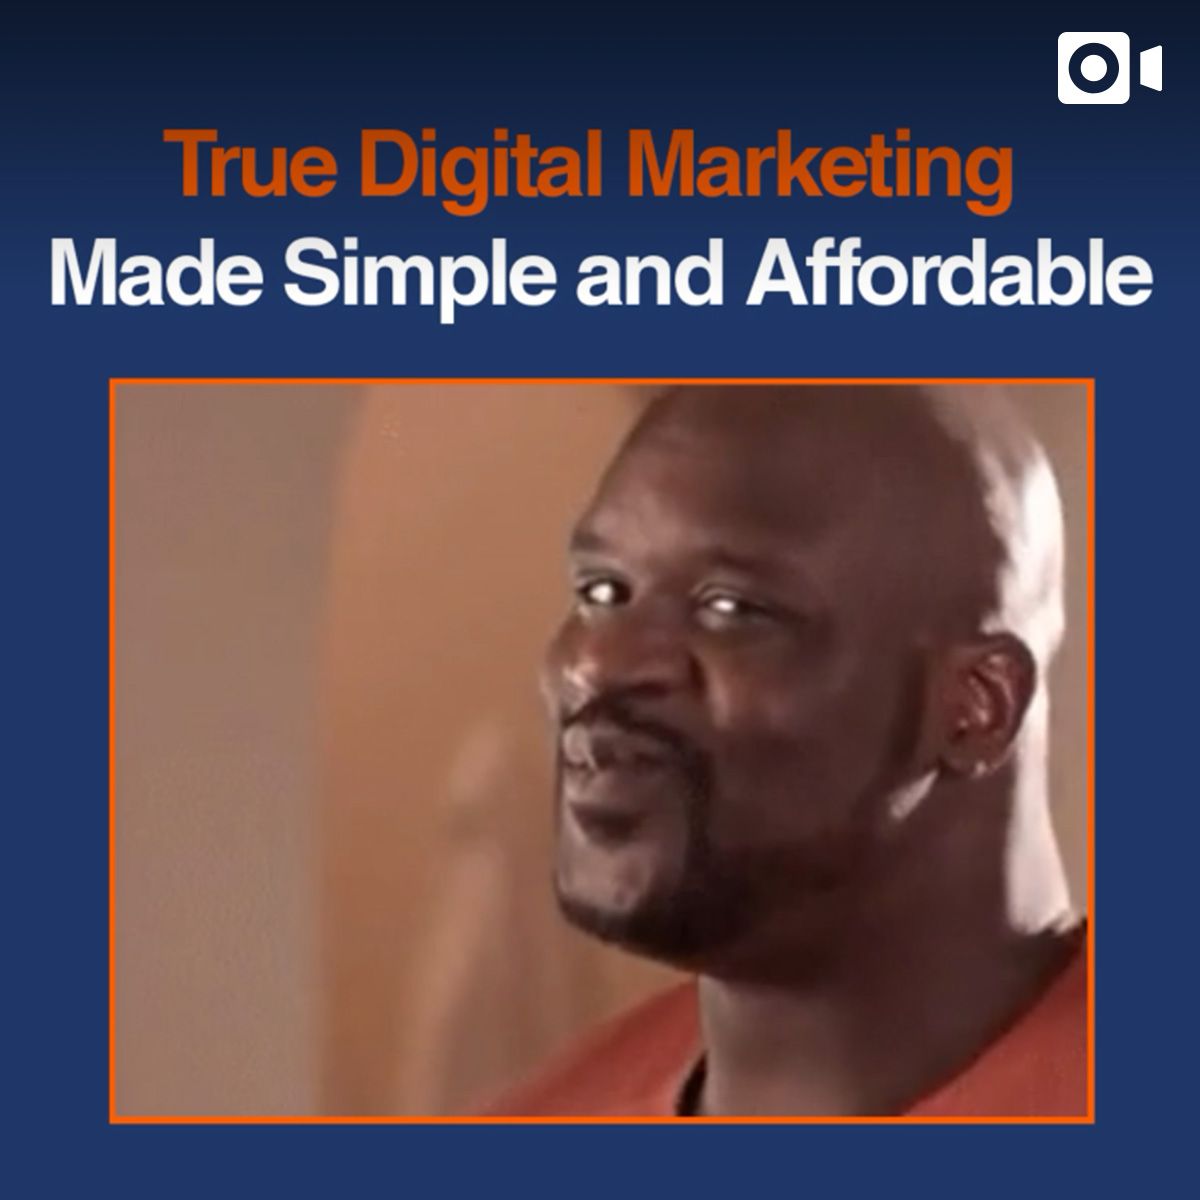 True Digital Marketing Technology Made Simple and Affordable